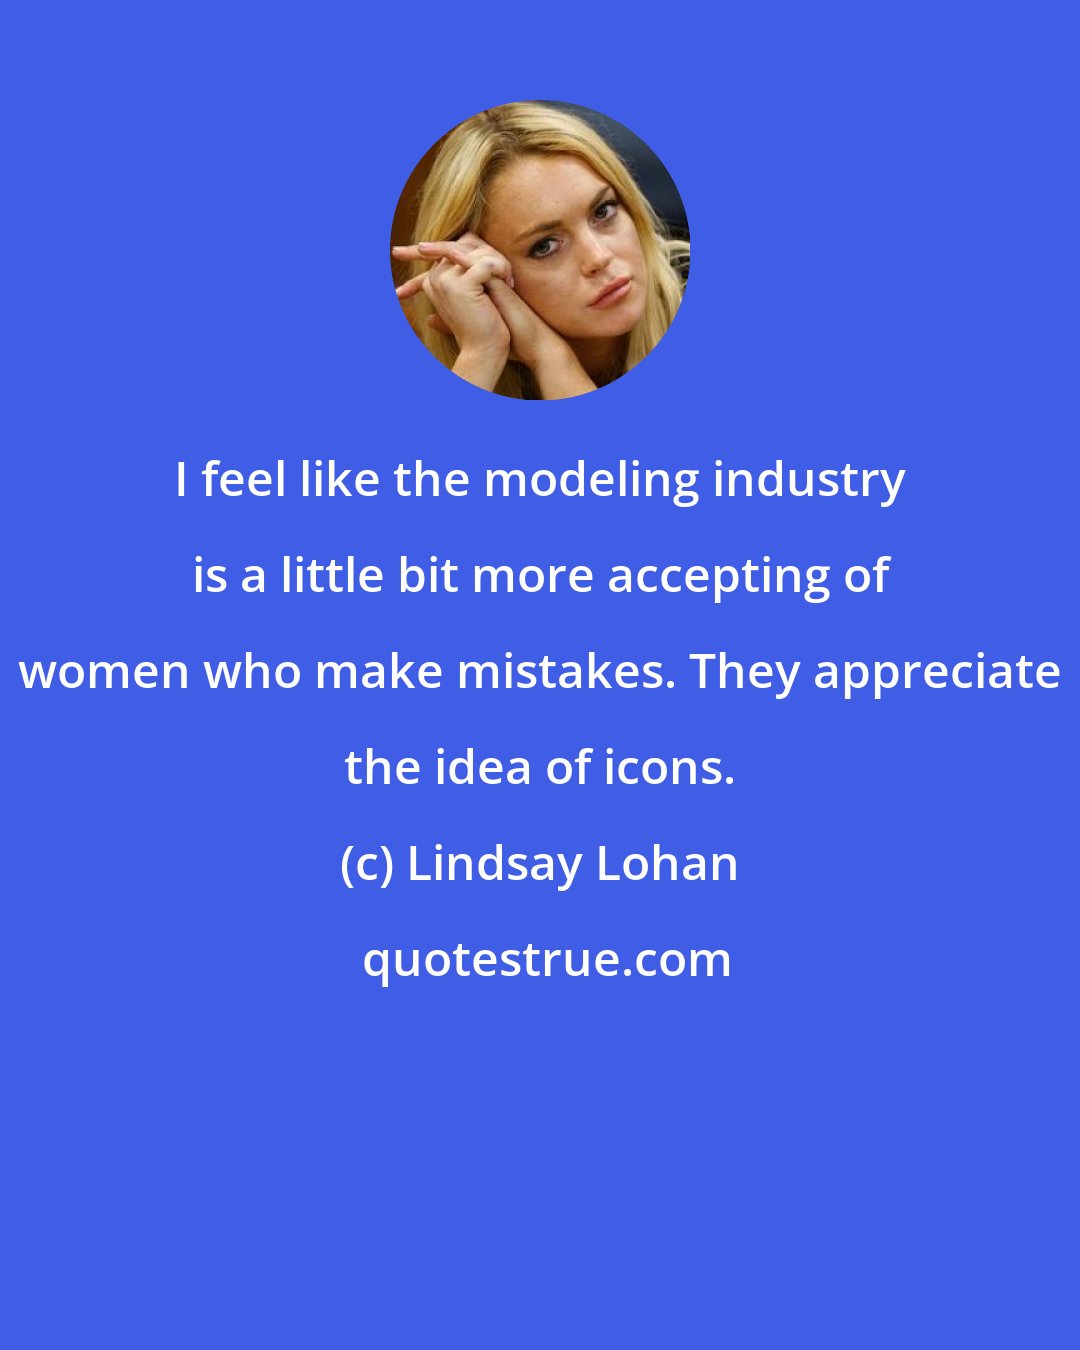 Lindsay Lohan: I feel like the modeling industry is a little bit more accepting of women who make mistakes. They appreciate the idea of icons.